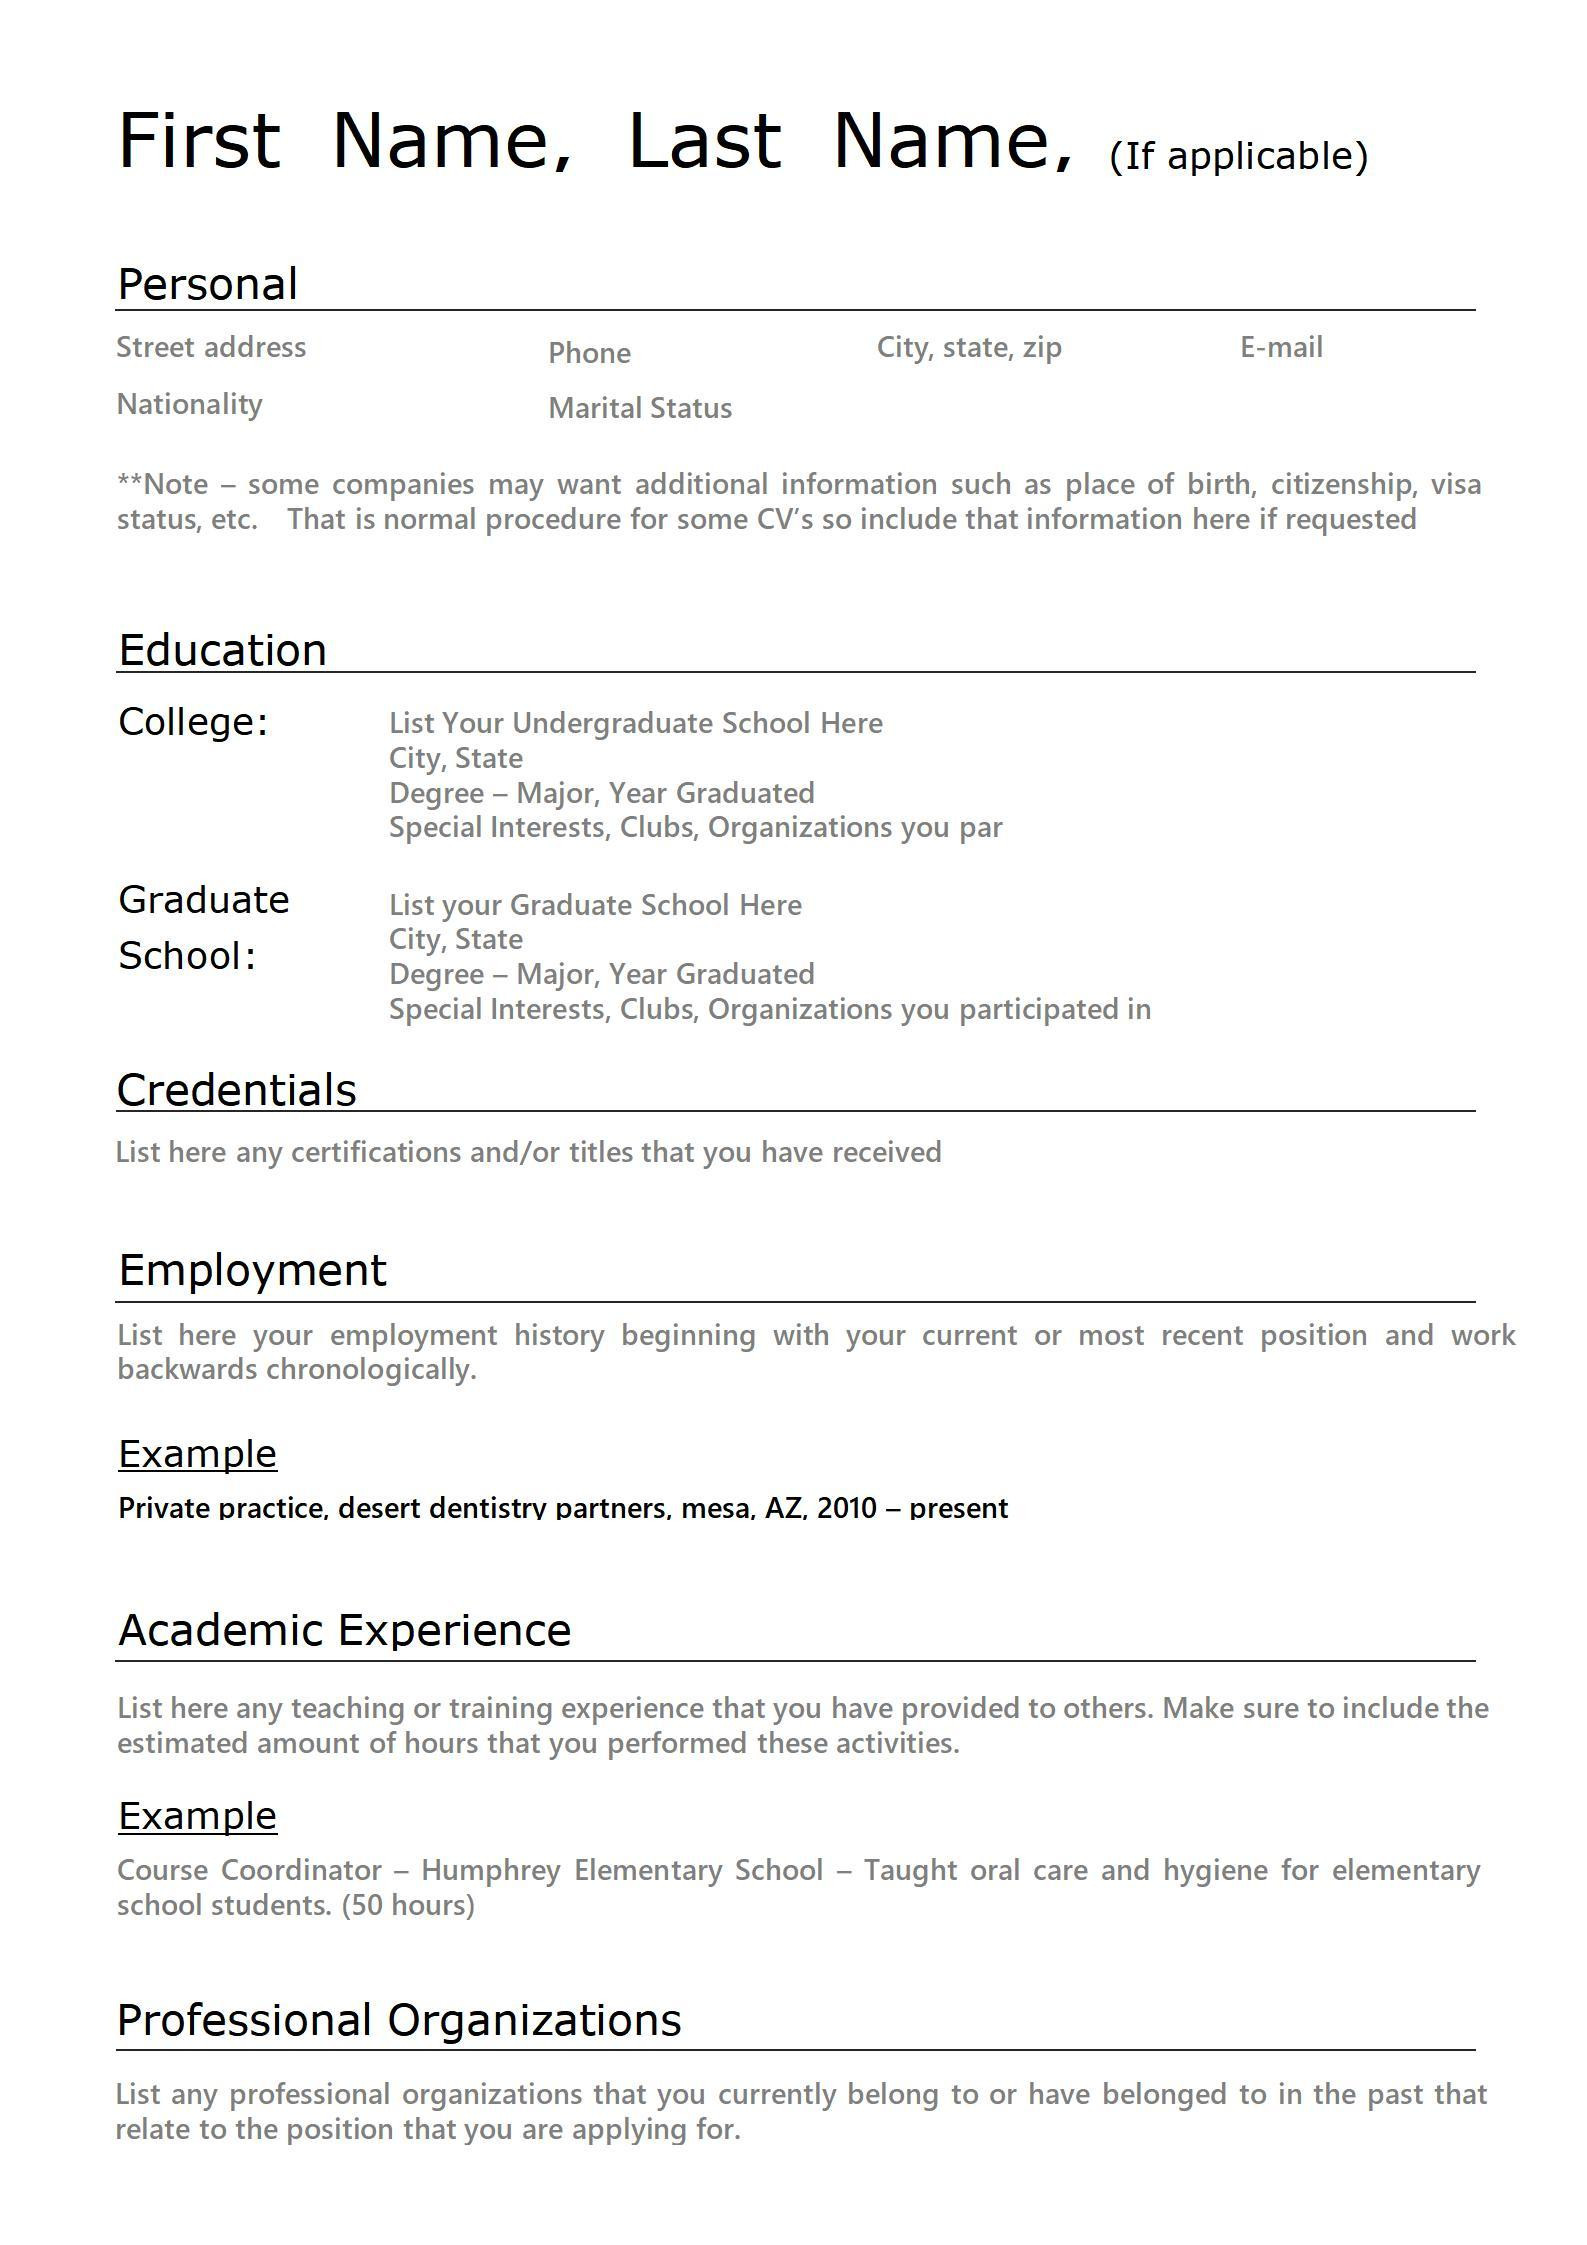 First Time Resume with No Work Experience Samples First-time Resume with No Experience Samples Wps Office Academy